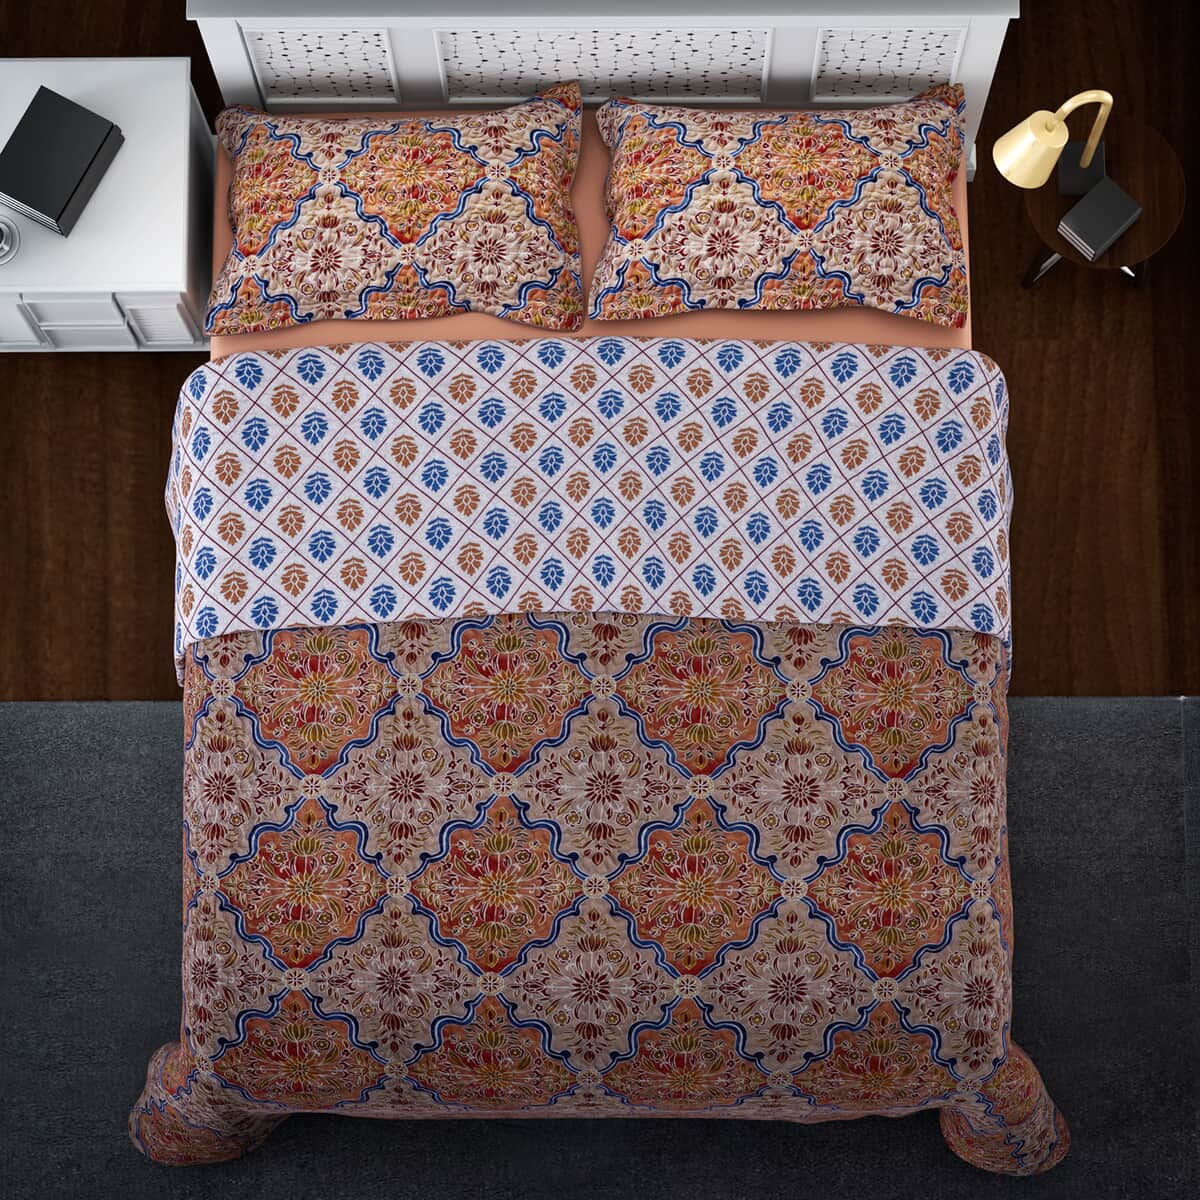 HOMESMART Orange and Blue Printed Microfiber Quilt (Queen) and Set of 2 Shams image number 1